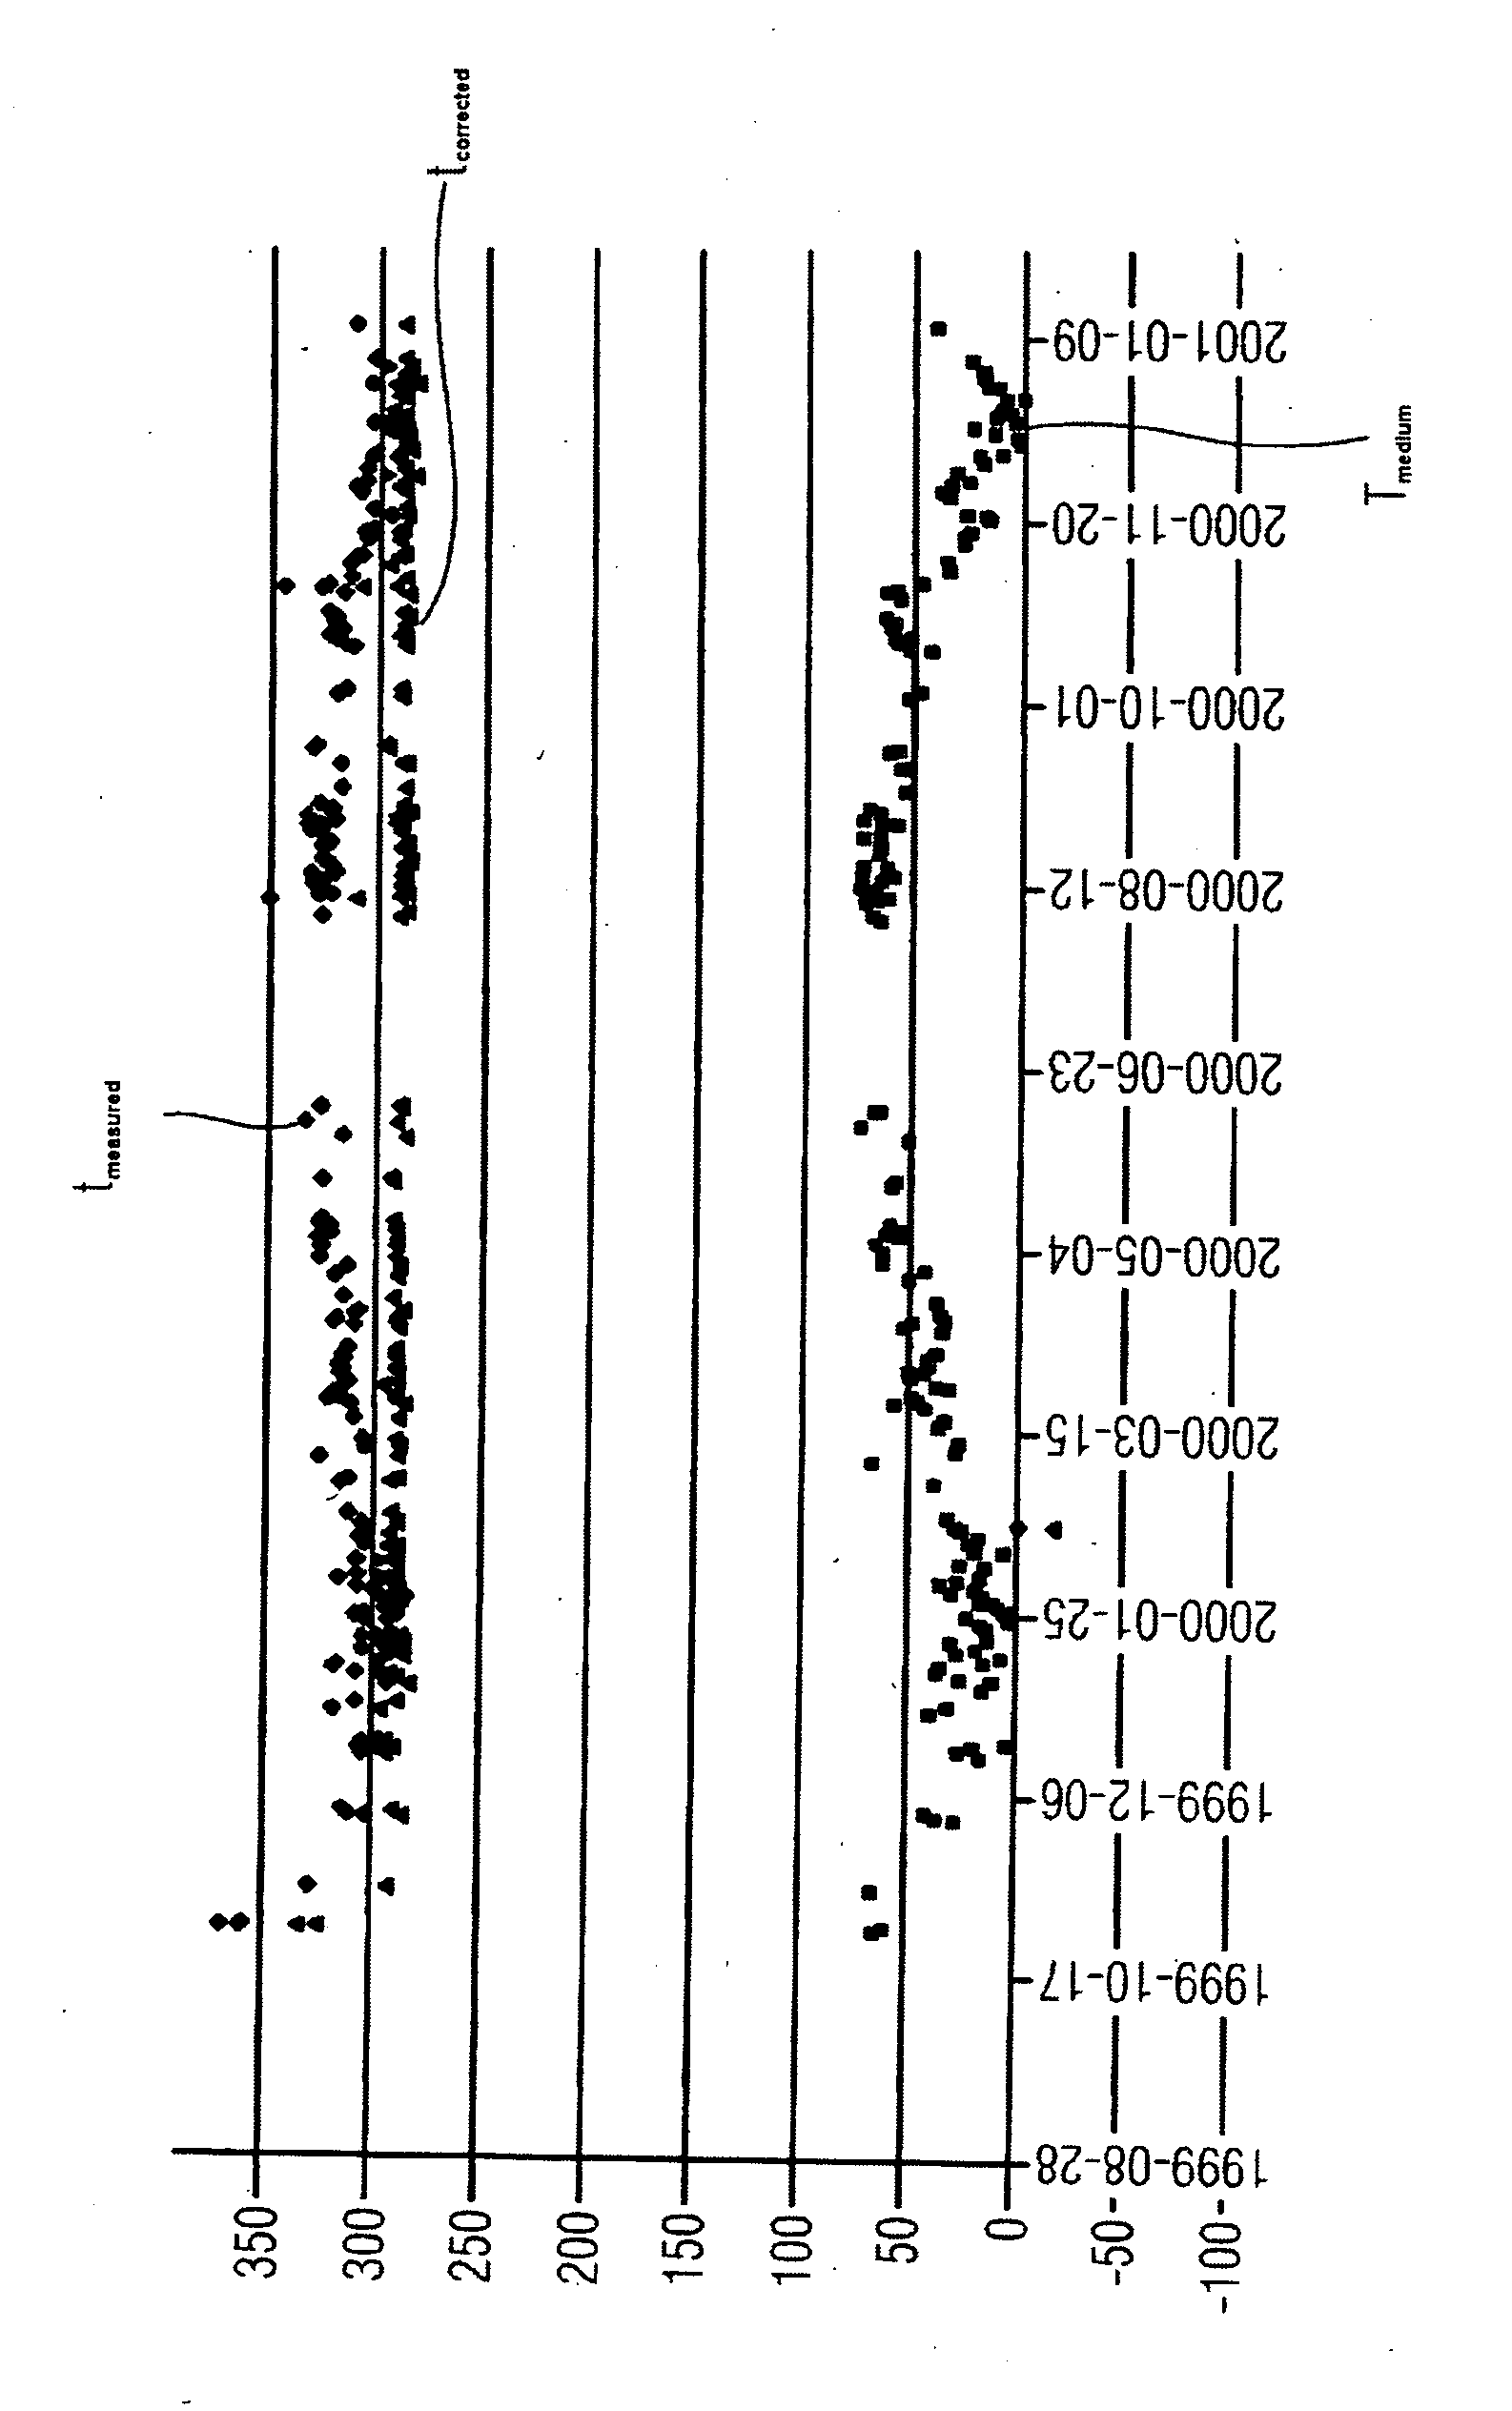 Method for Monitoring the State of Turbines Based on their Coasting Time